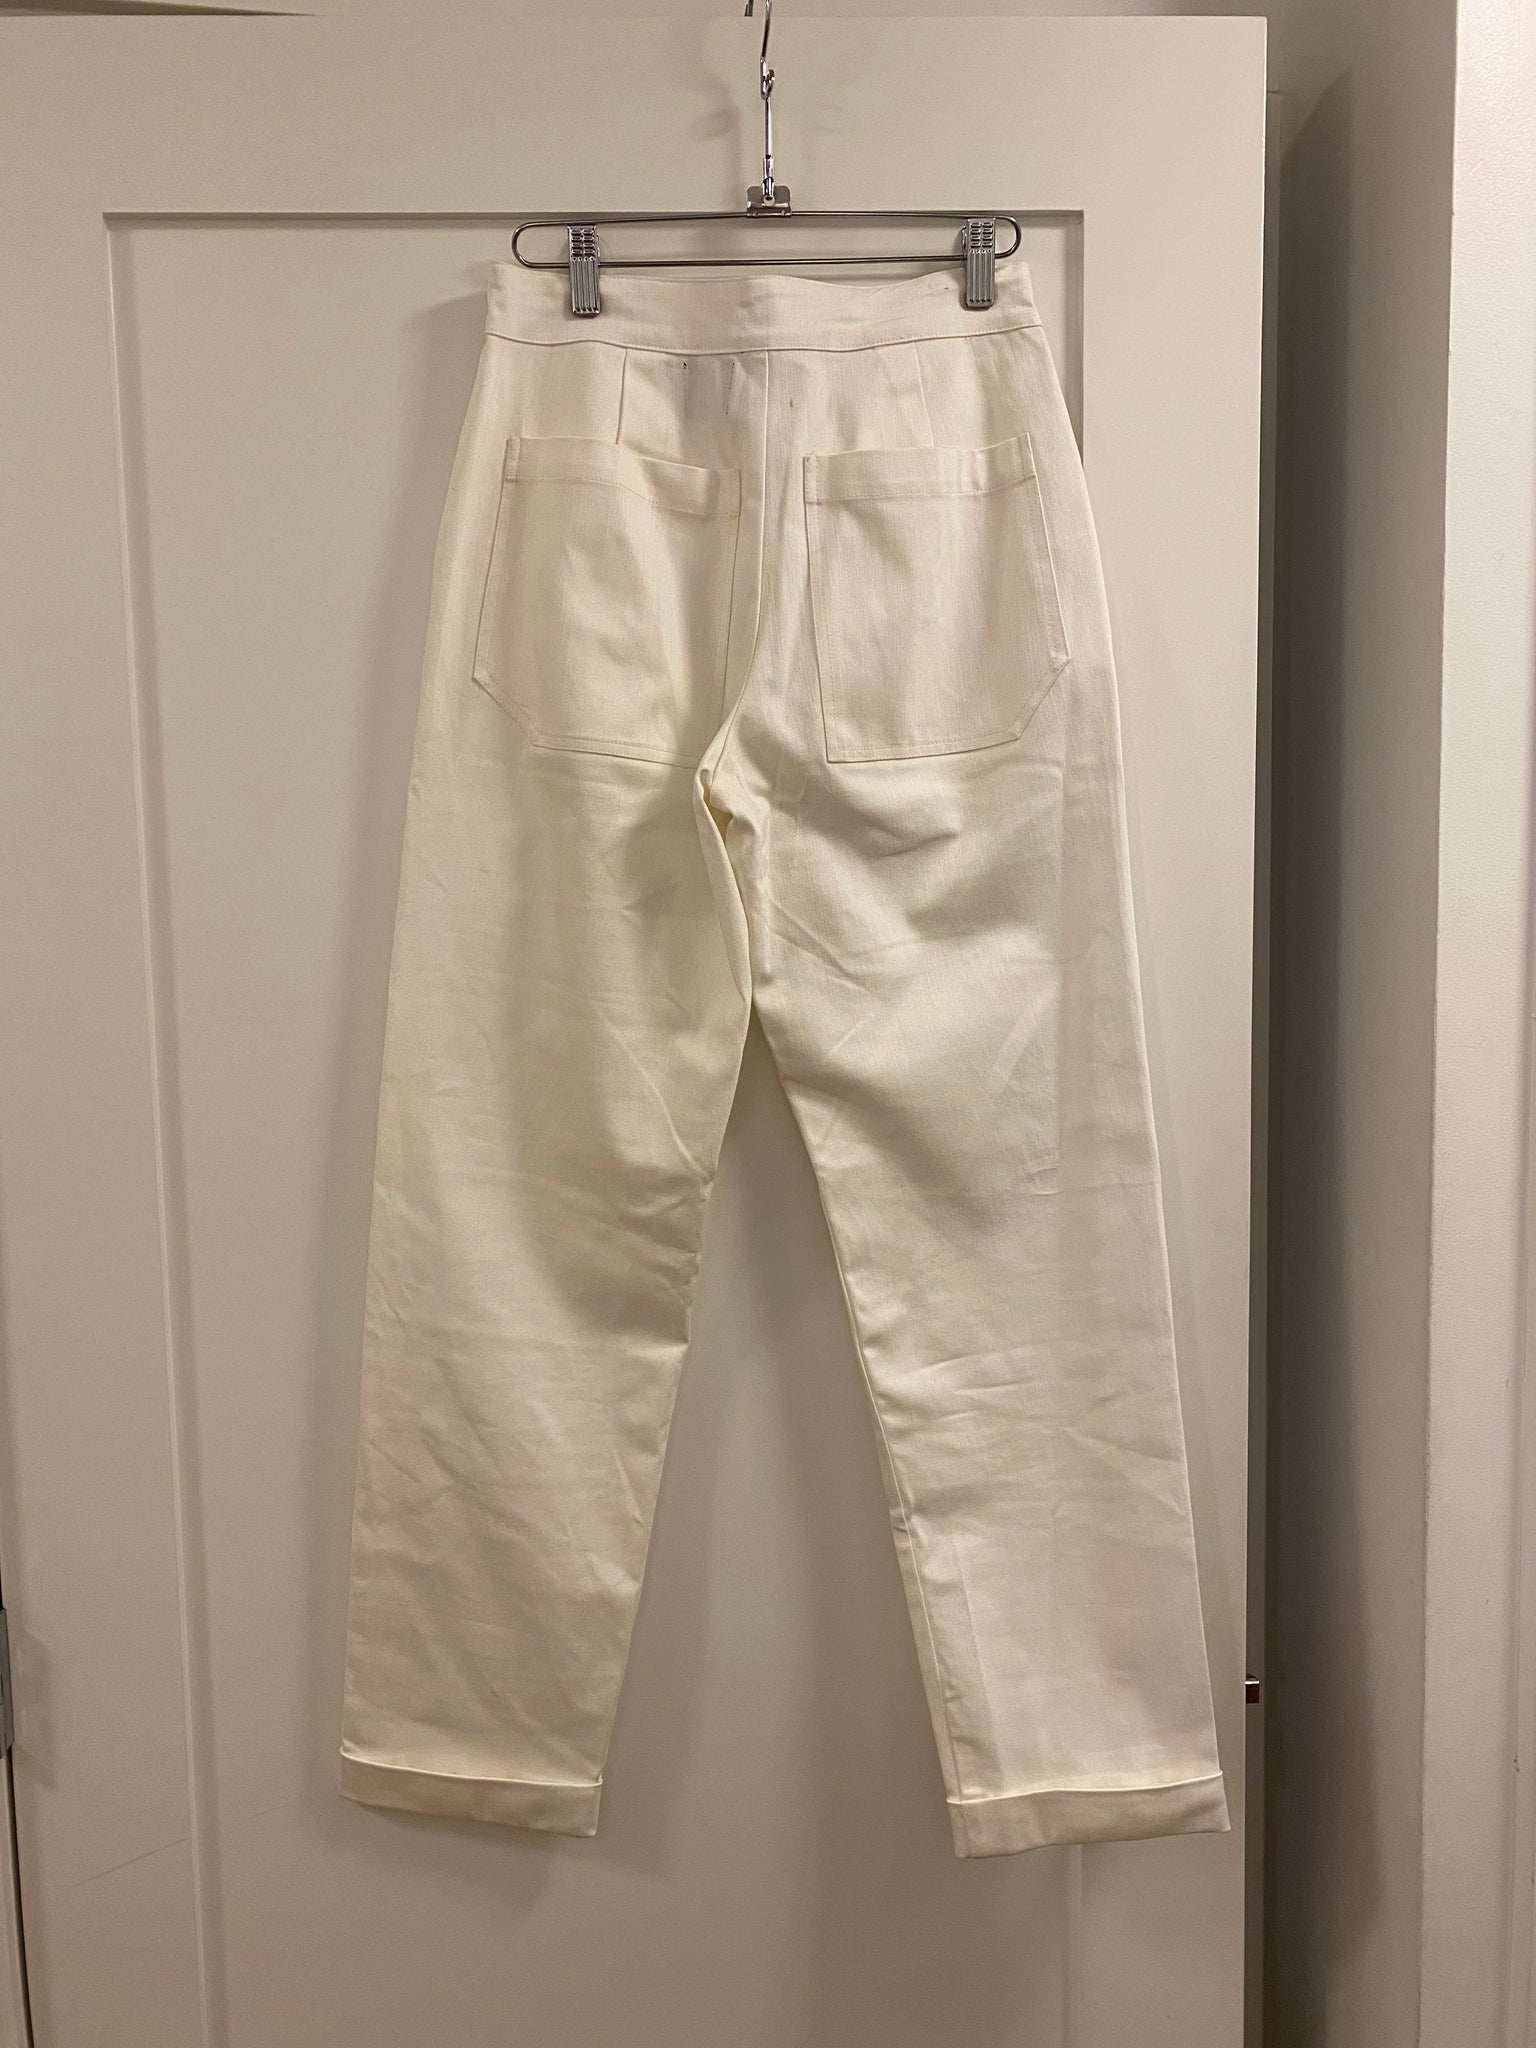 Dayandra Pant in White - Size S